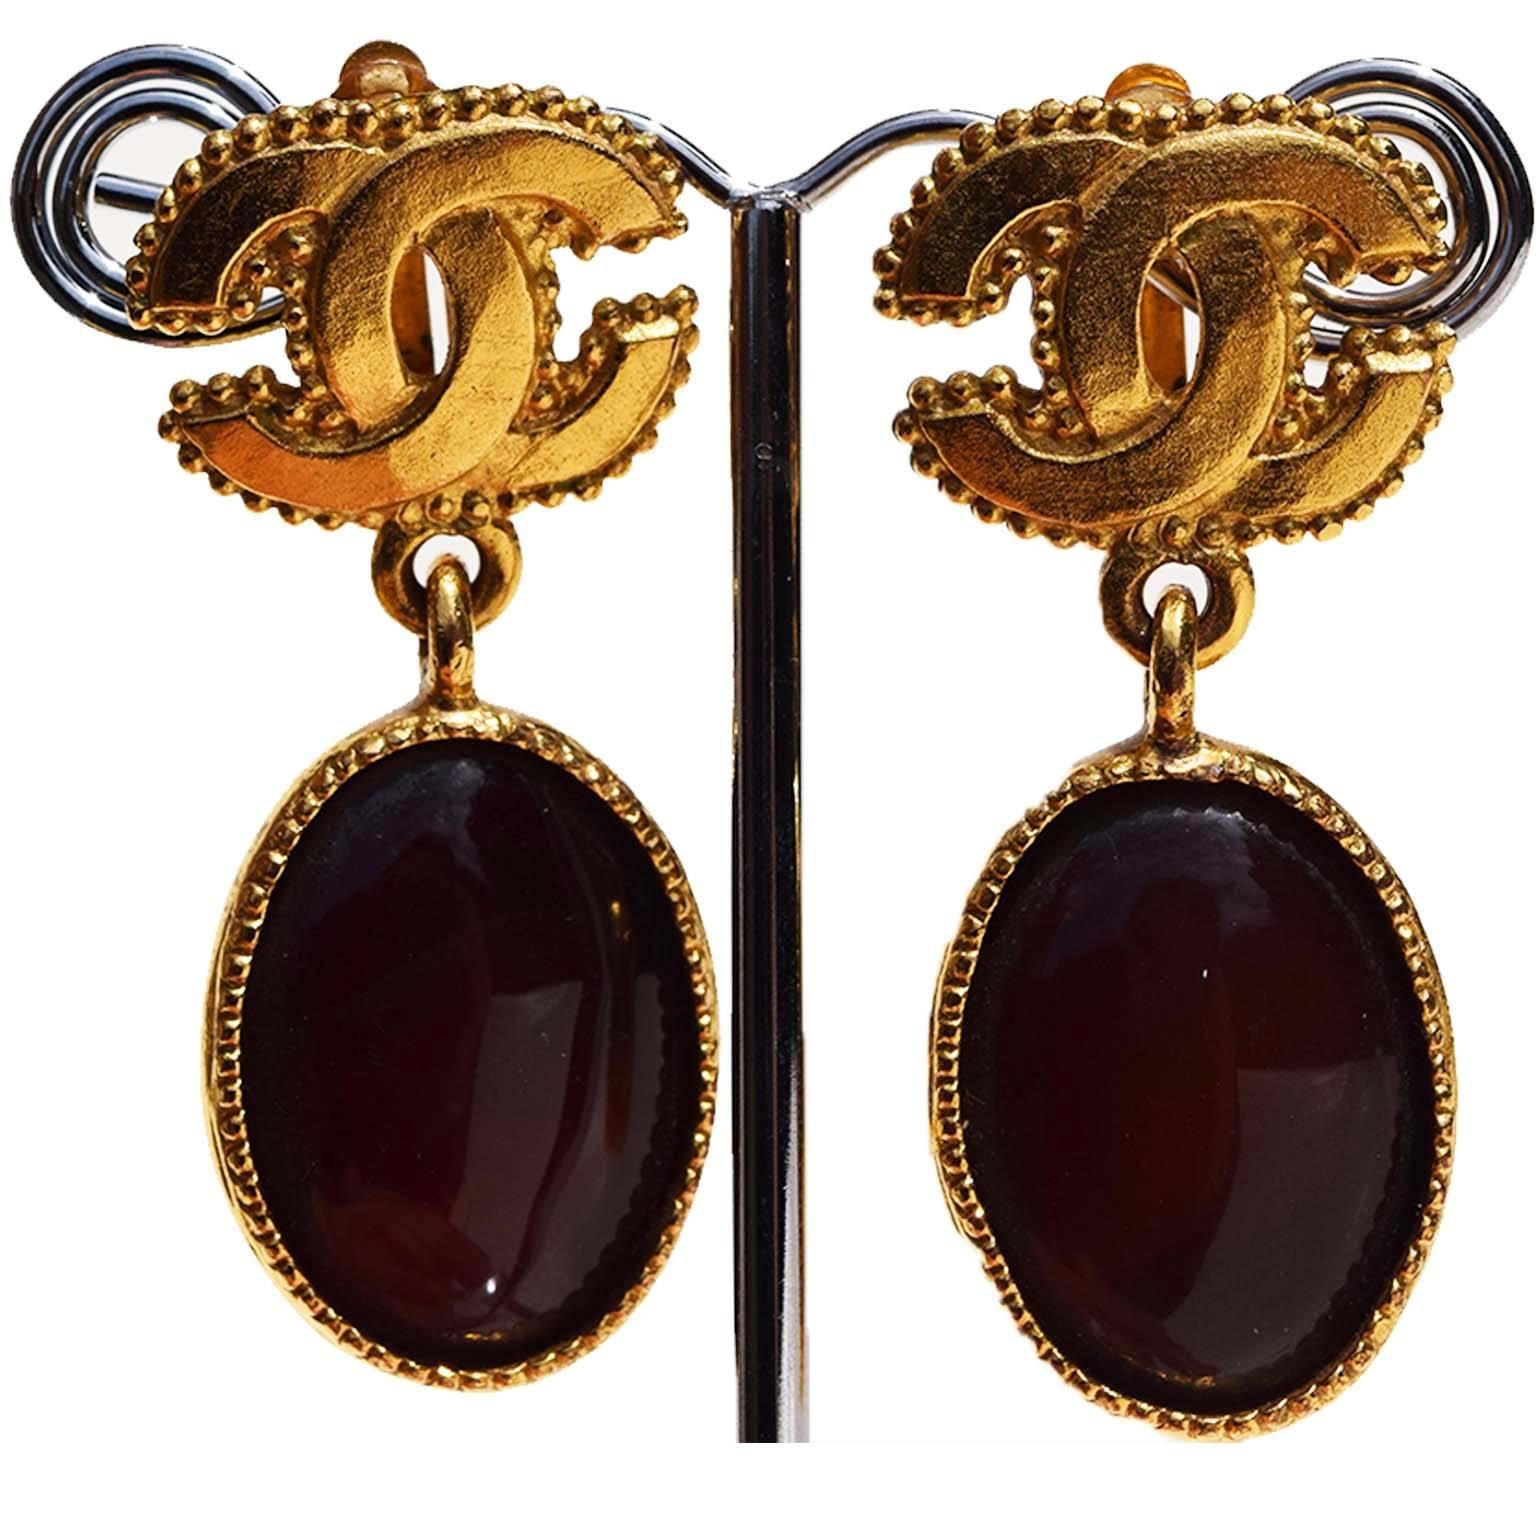 
Chanel vintage burgundy drop earrings. CC logo with a gold bordered burgundy pendant. 96A (1996 Autumn) collection.

Details:
Creator: Chanel
Place of Origin: France
Date of Manufacture: 1996
Condition: Excellent vintage condition. Clips are